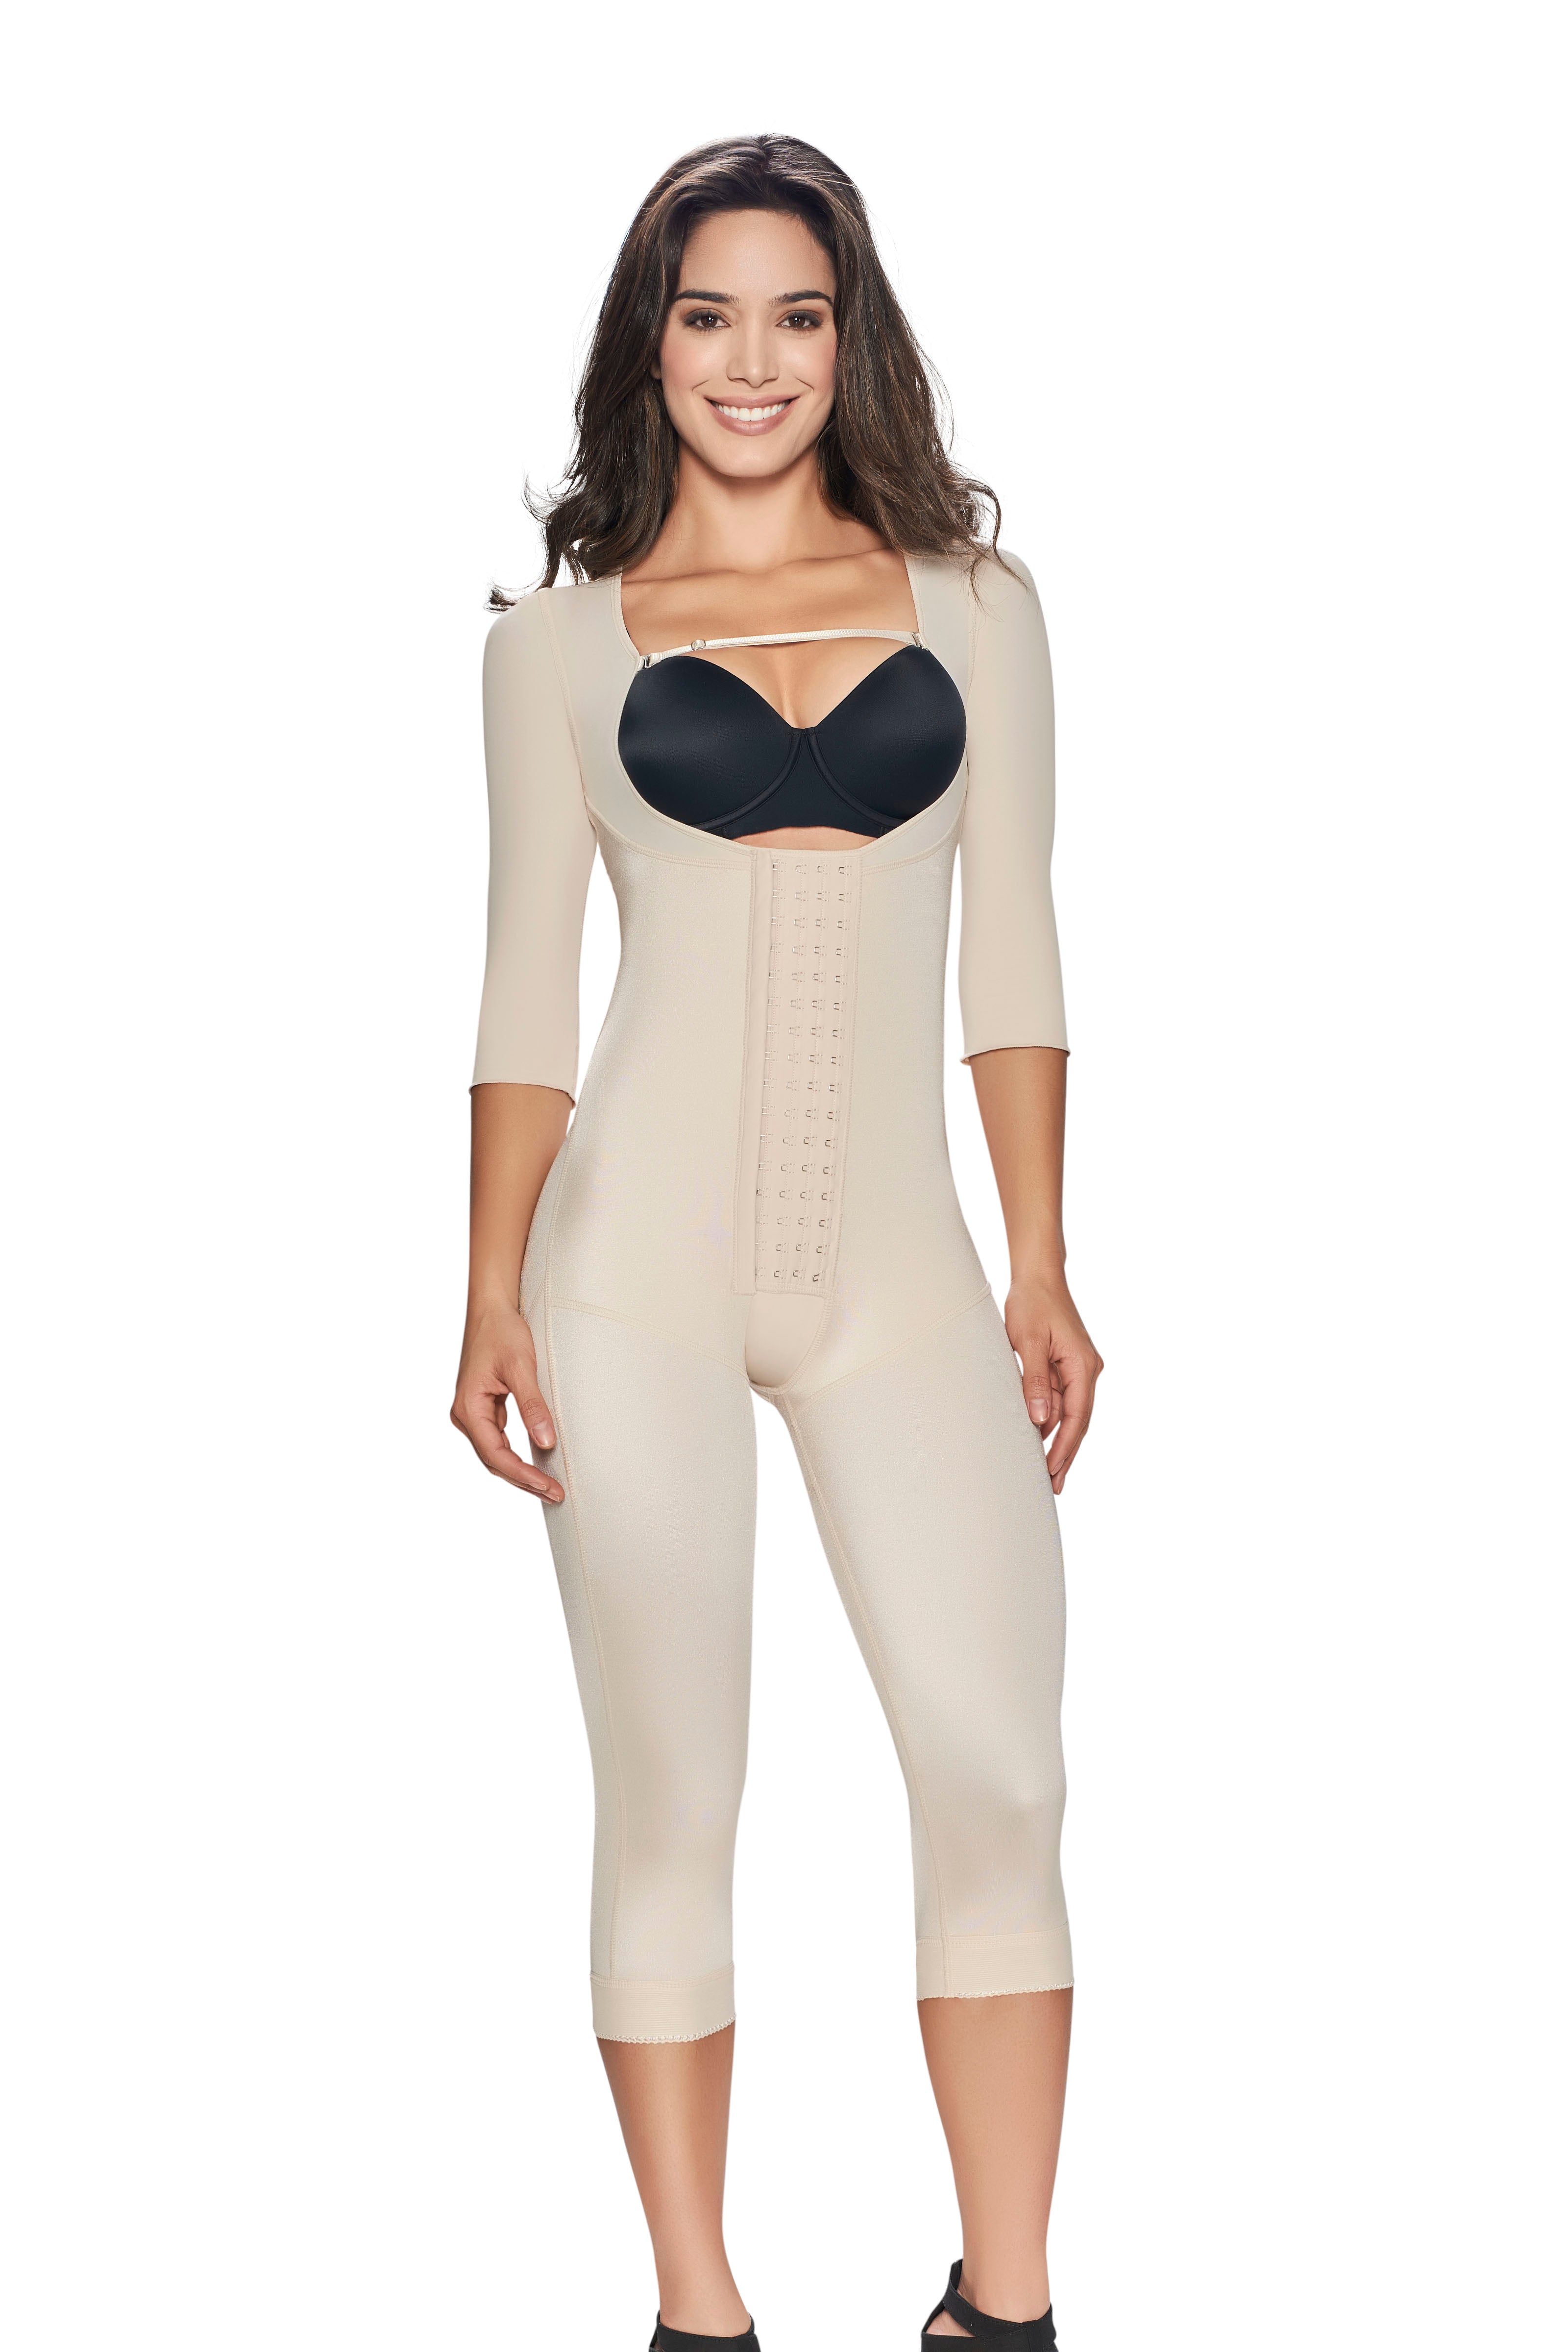 Post-Surgical Garments, Post-Surgical Shapewear